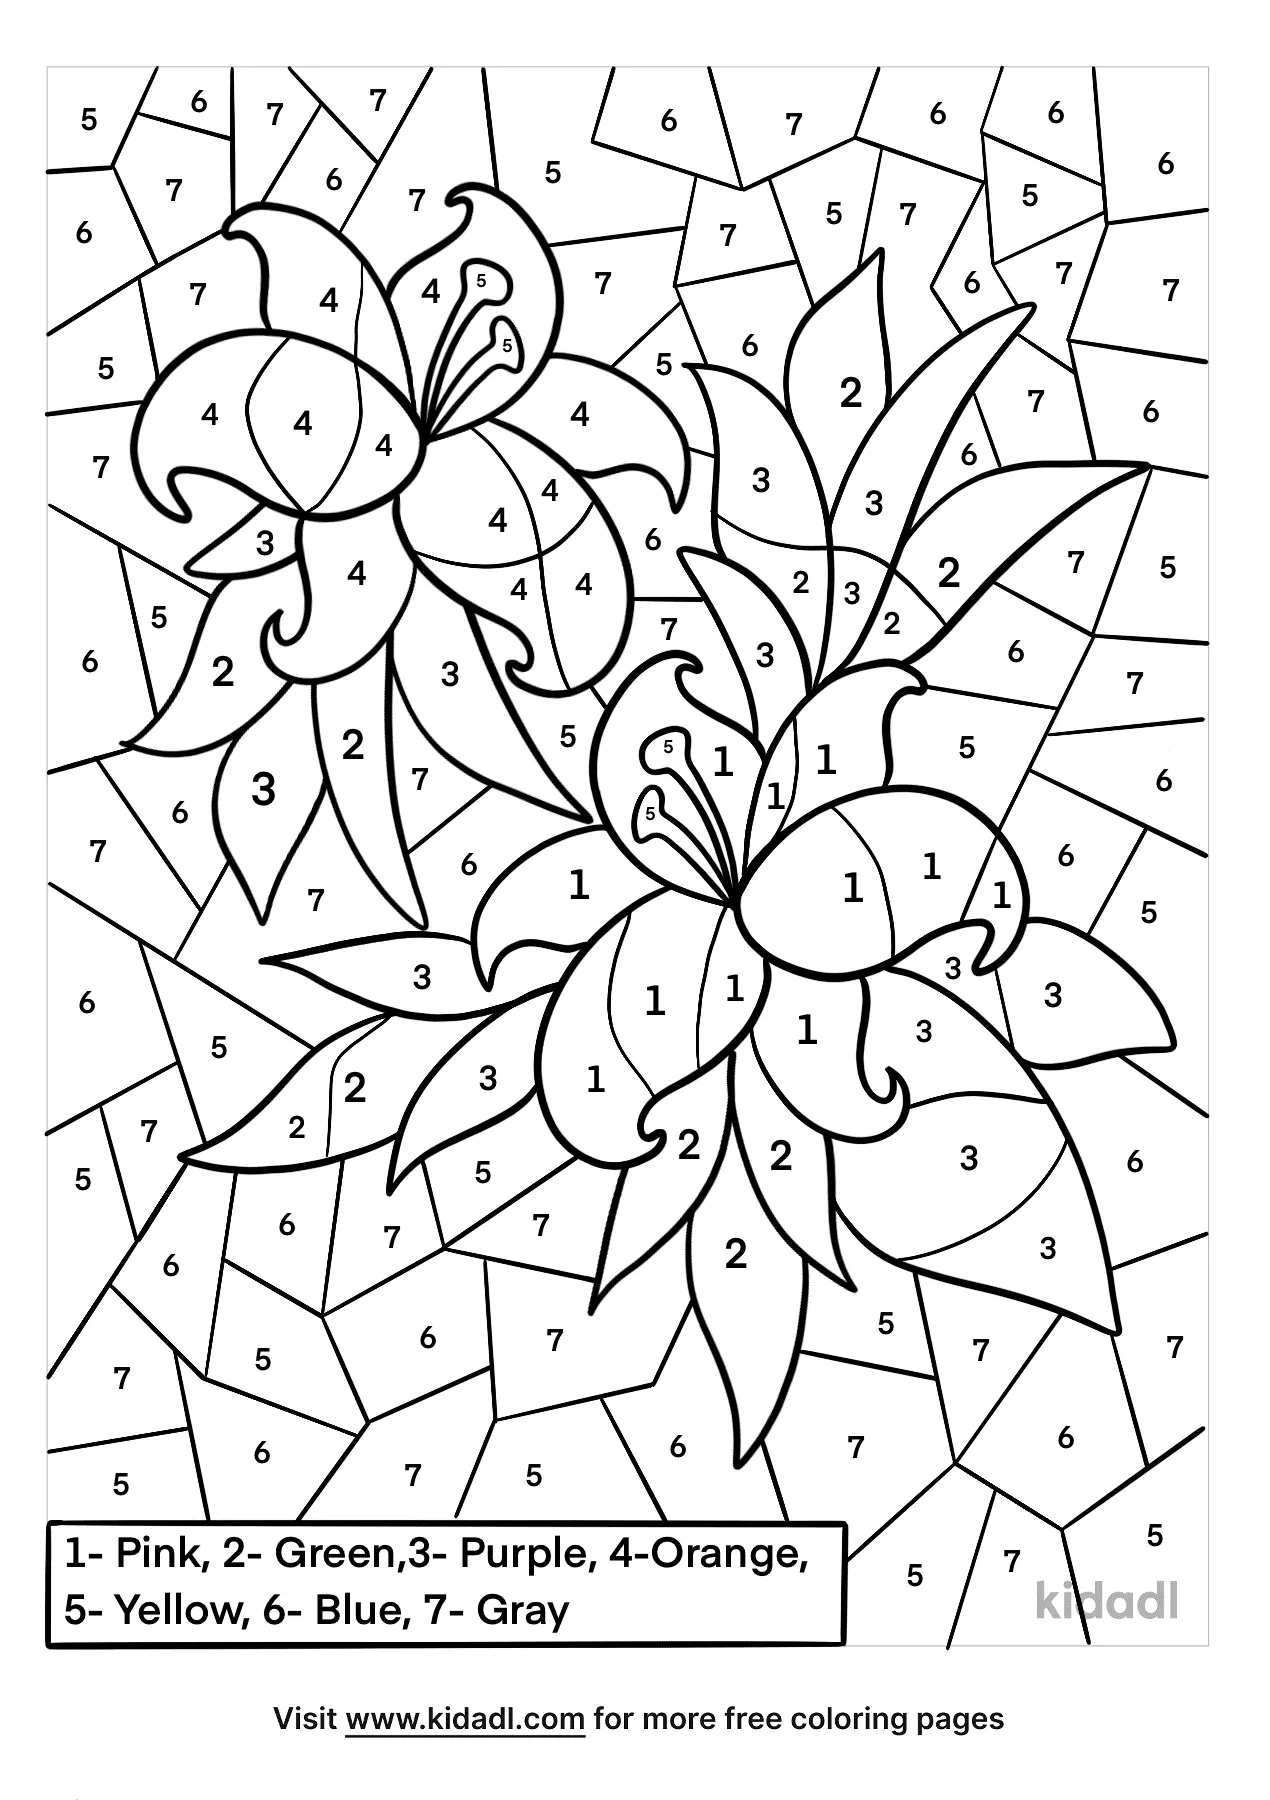 Difficult Color By Numbers Coloring Page | Free Color-by-number ...